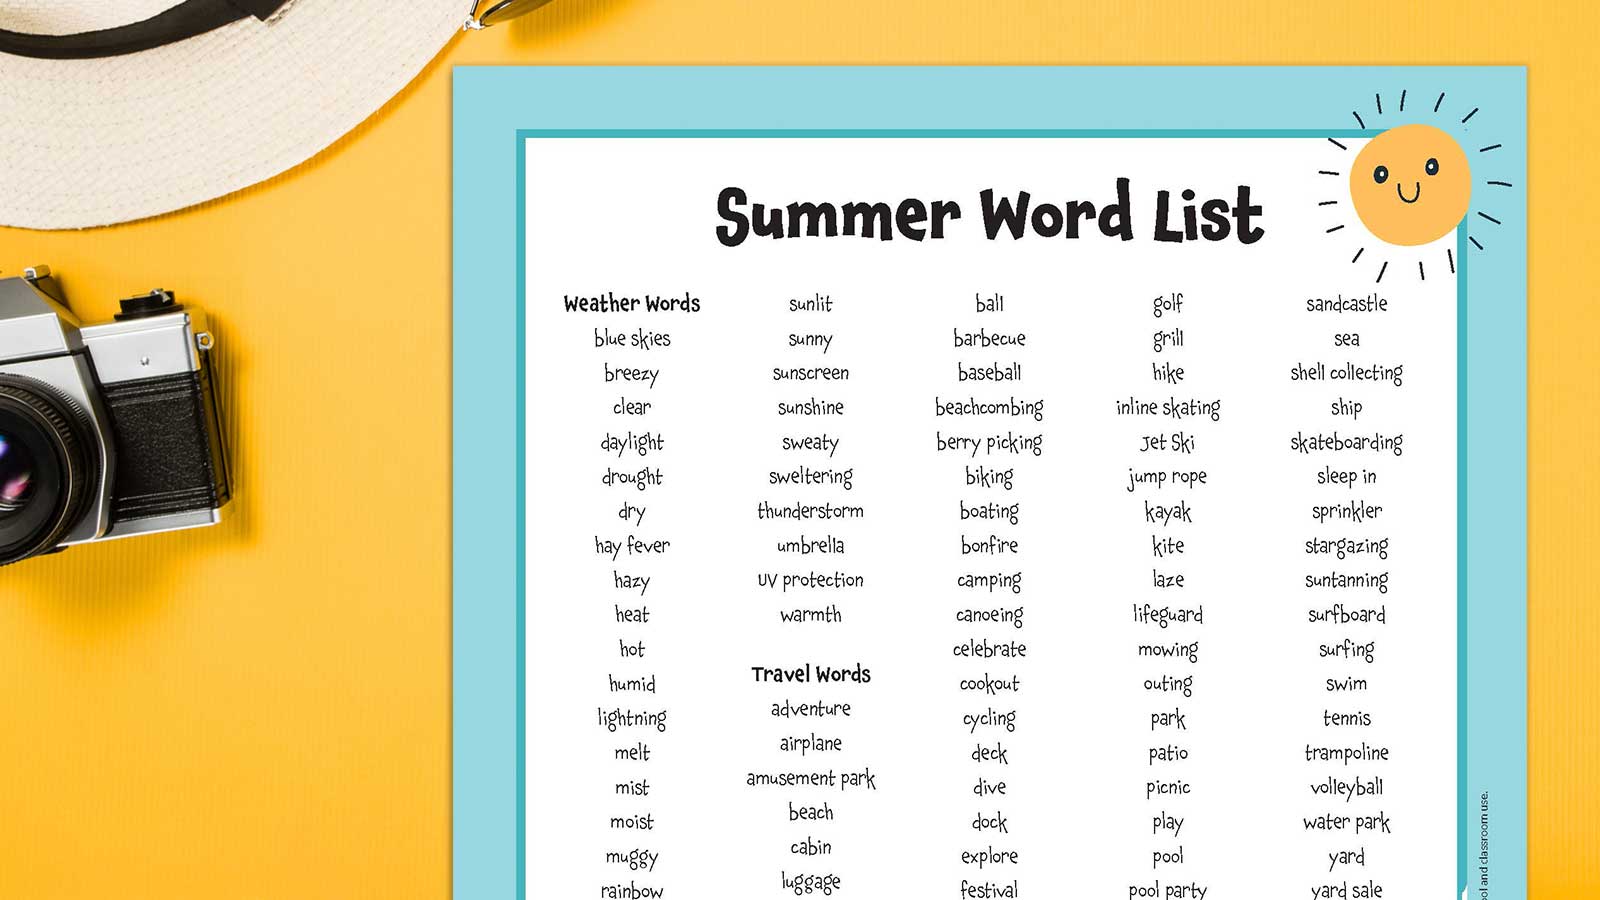 Printable list with summer words on rectangular yellow background with a camera.